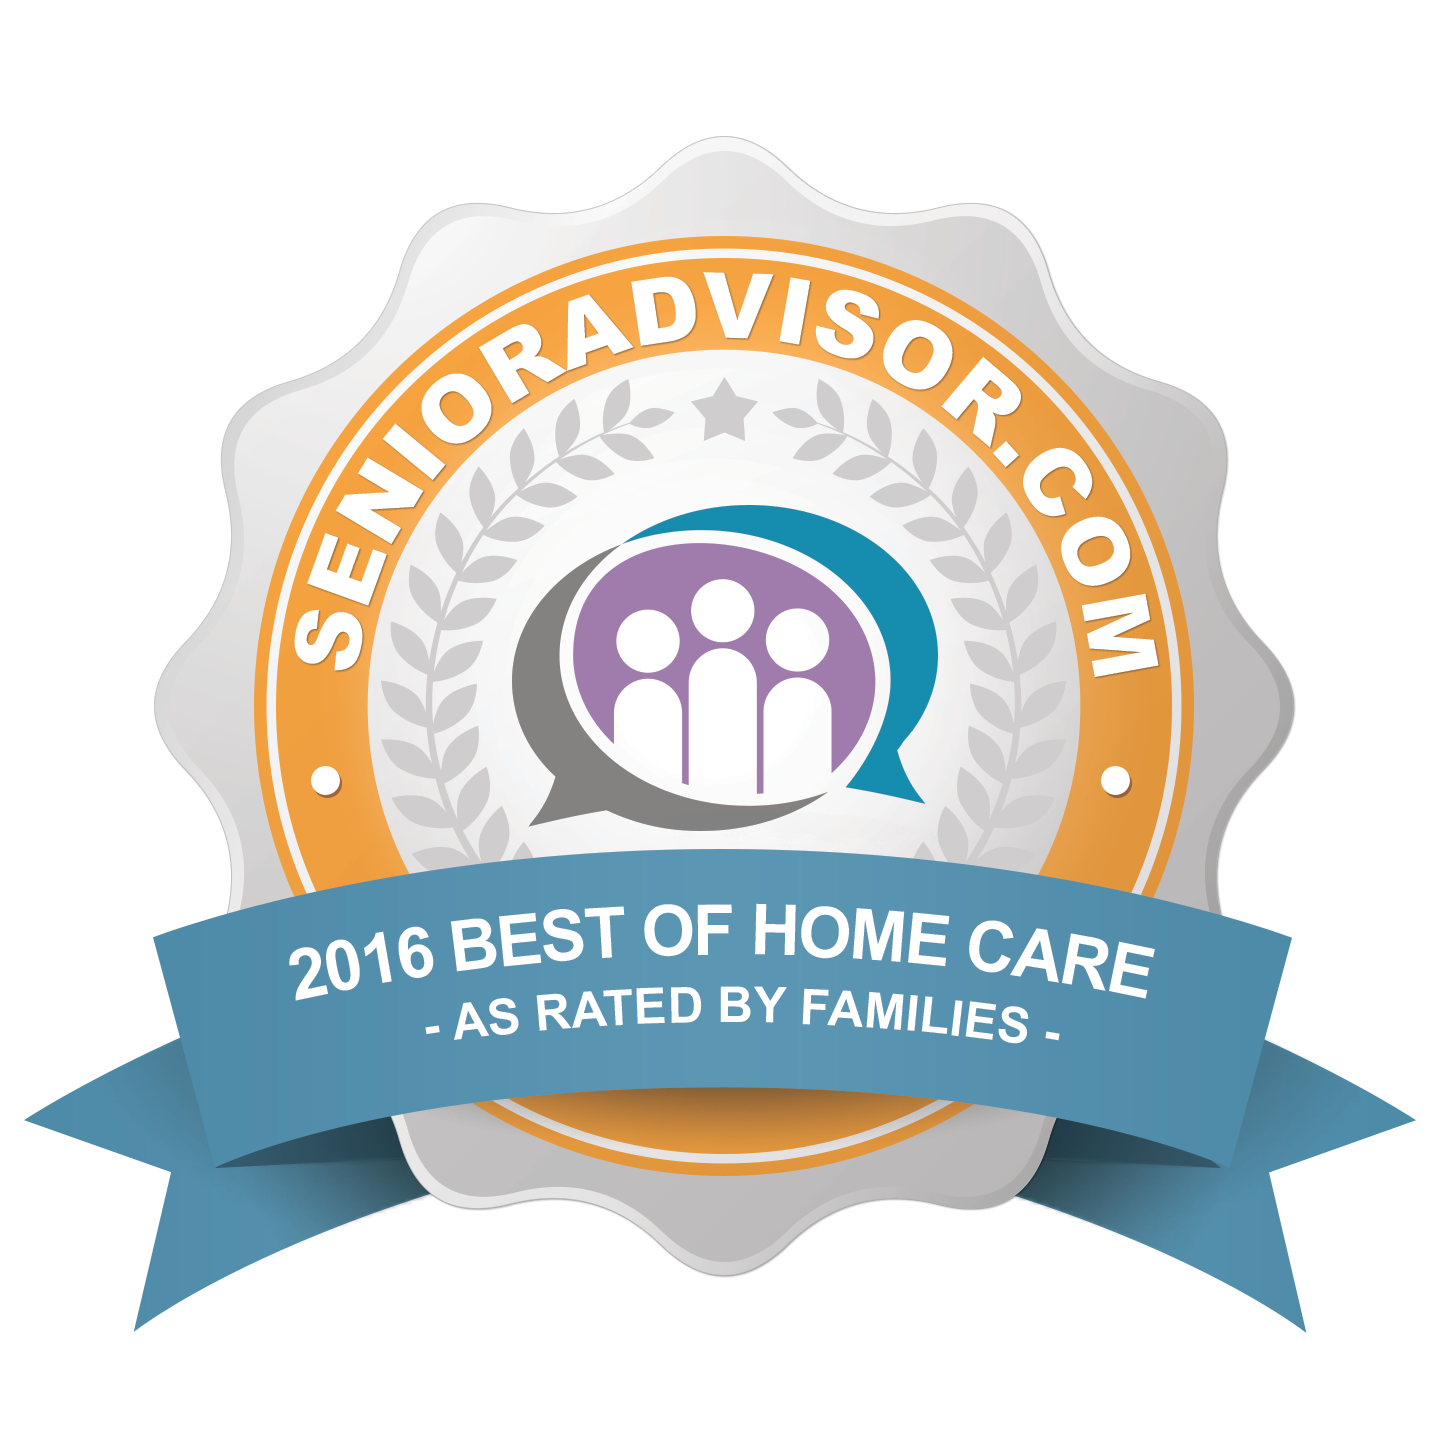 2016 Best of Home Care